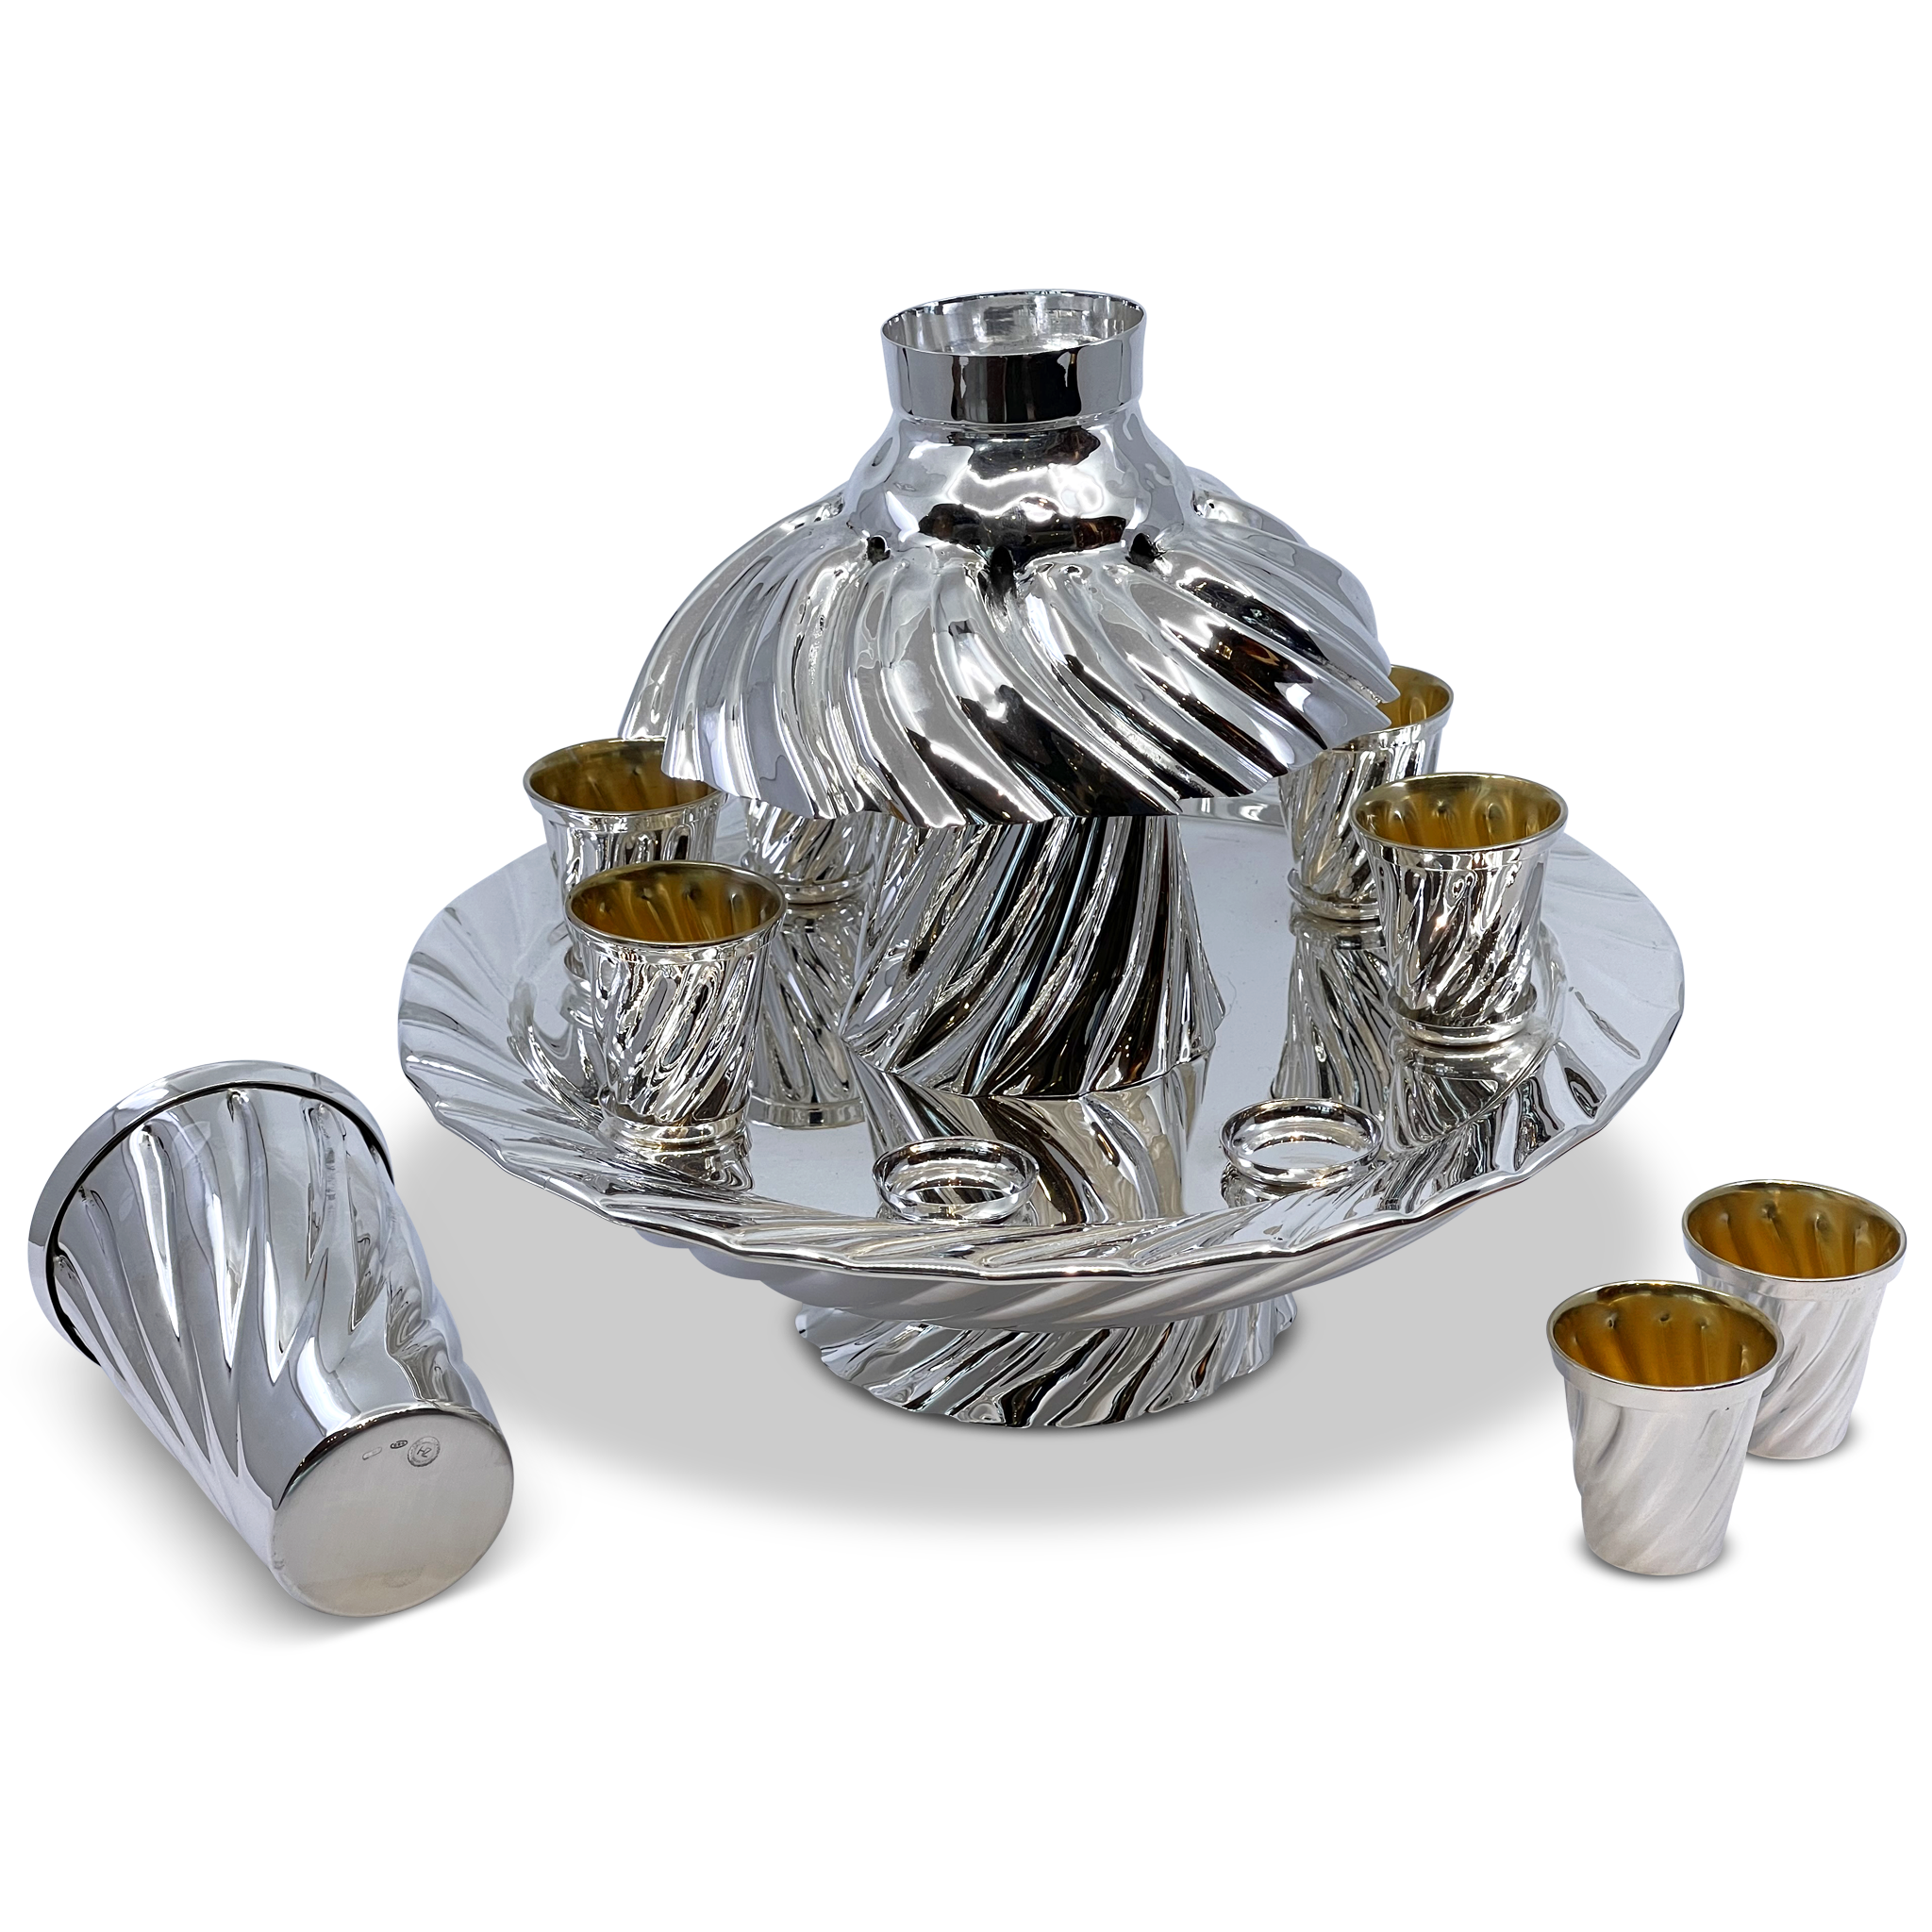 Silver Kiddush Fountain Spiral Collection A - Piece By Zion Hadad